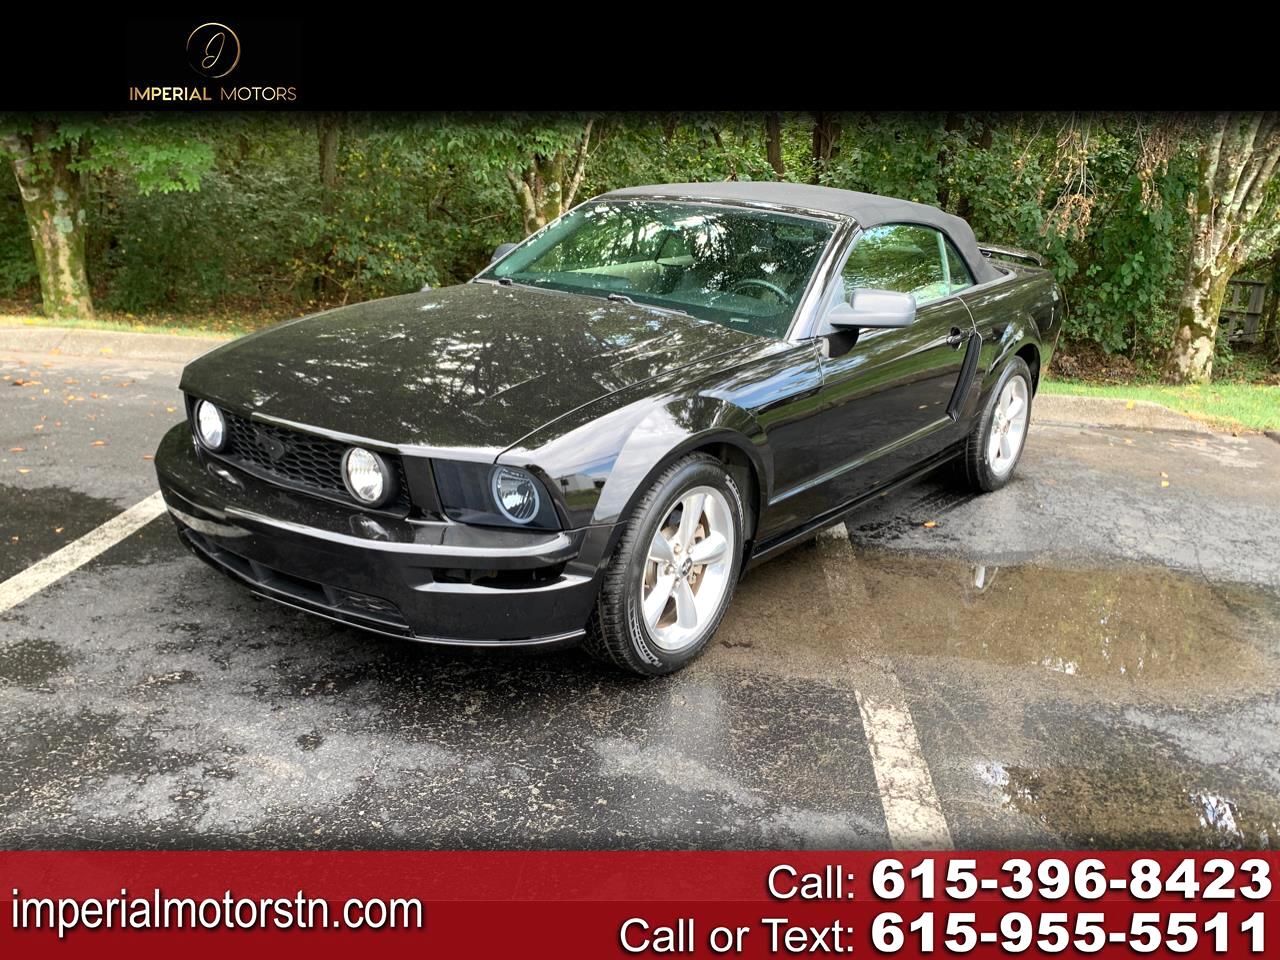 2007 Ford Mustang GT Deluxe Convertible